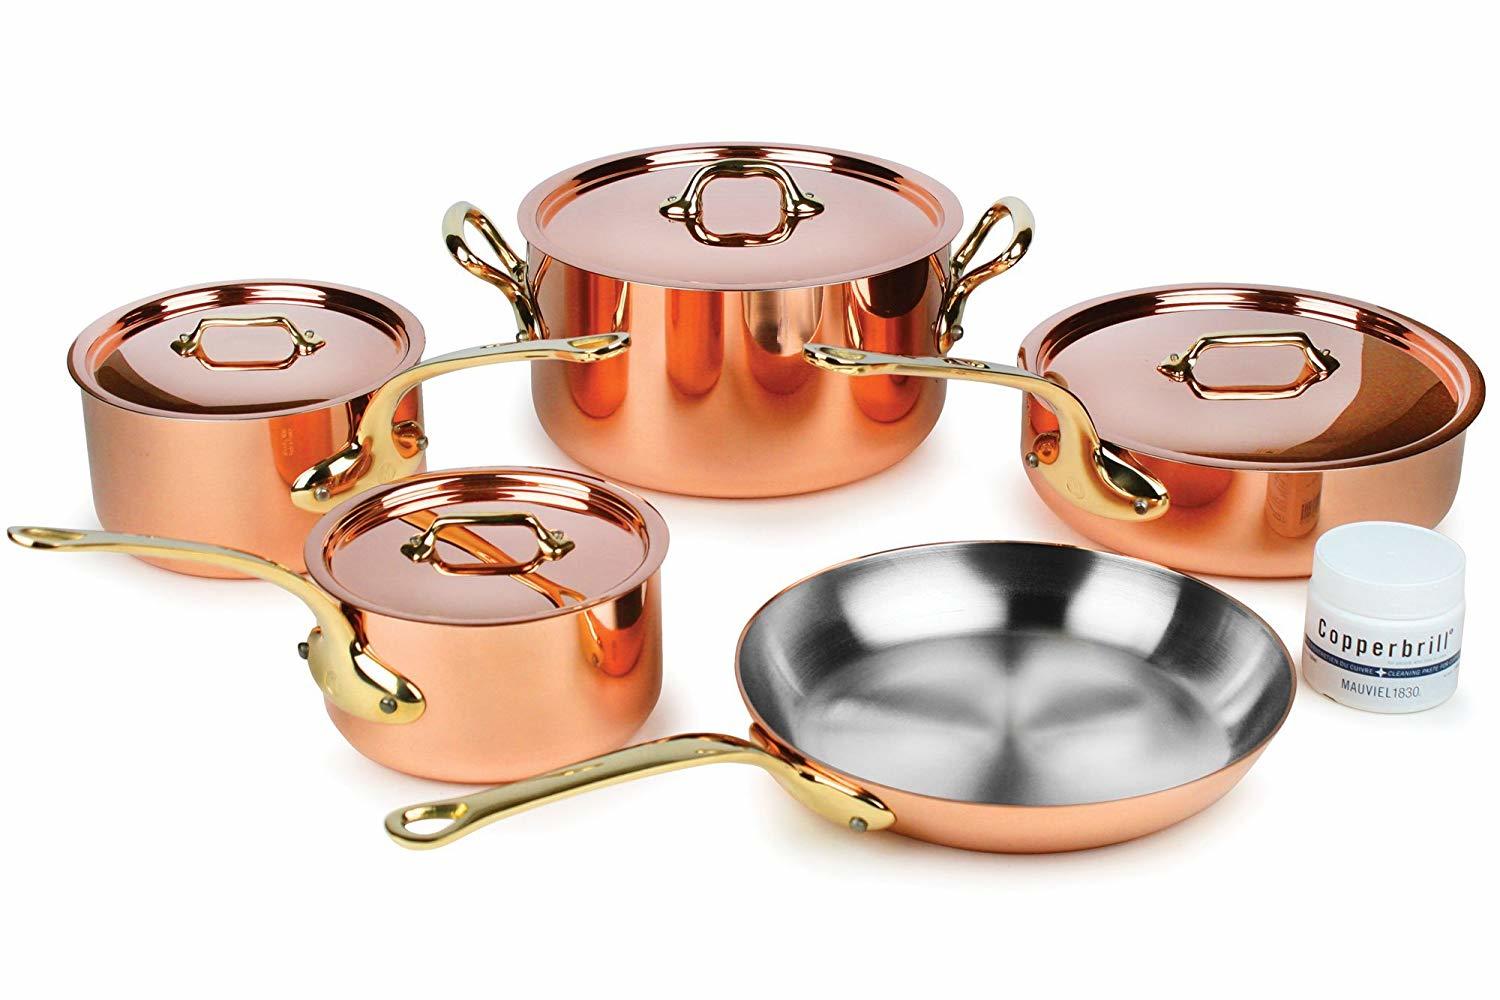 Eater x Heritage Steel 5 Piece Essentials Set, Made in USA, 5 Ply Fully Clad